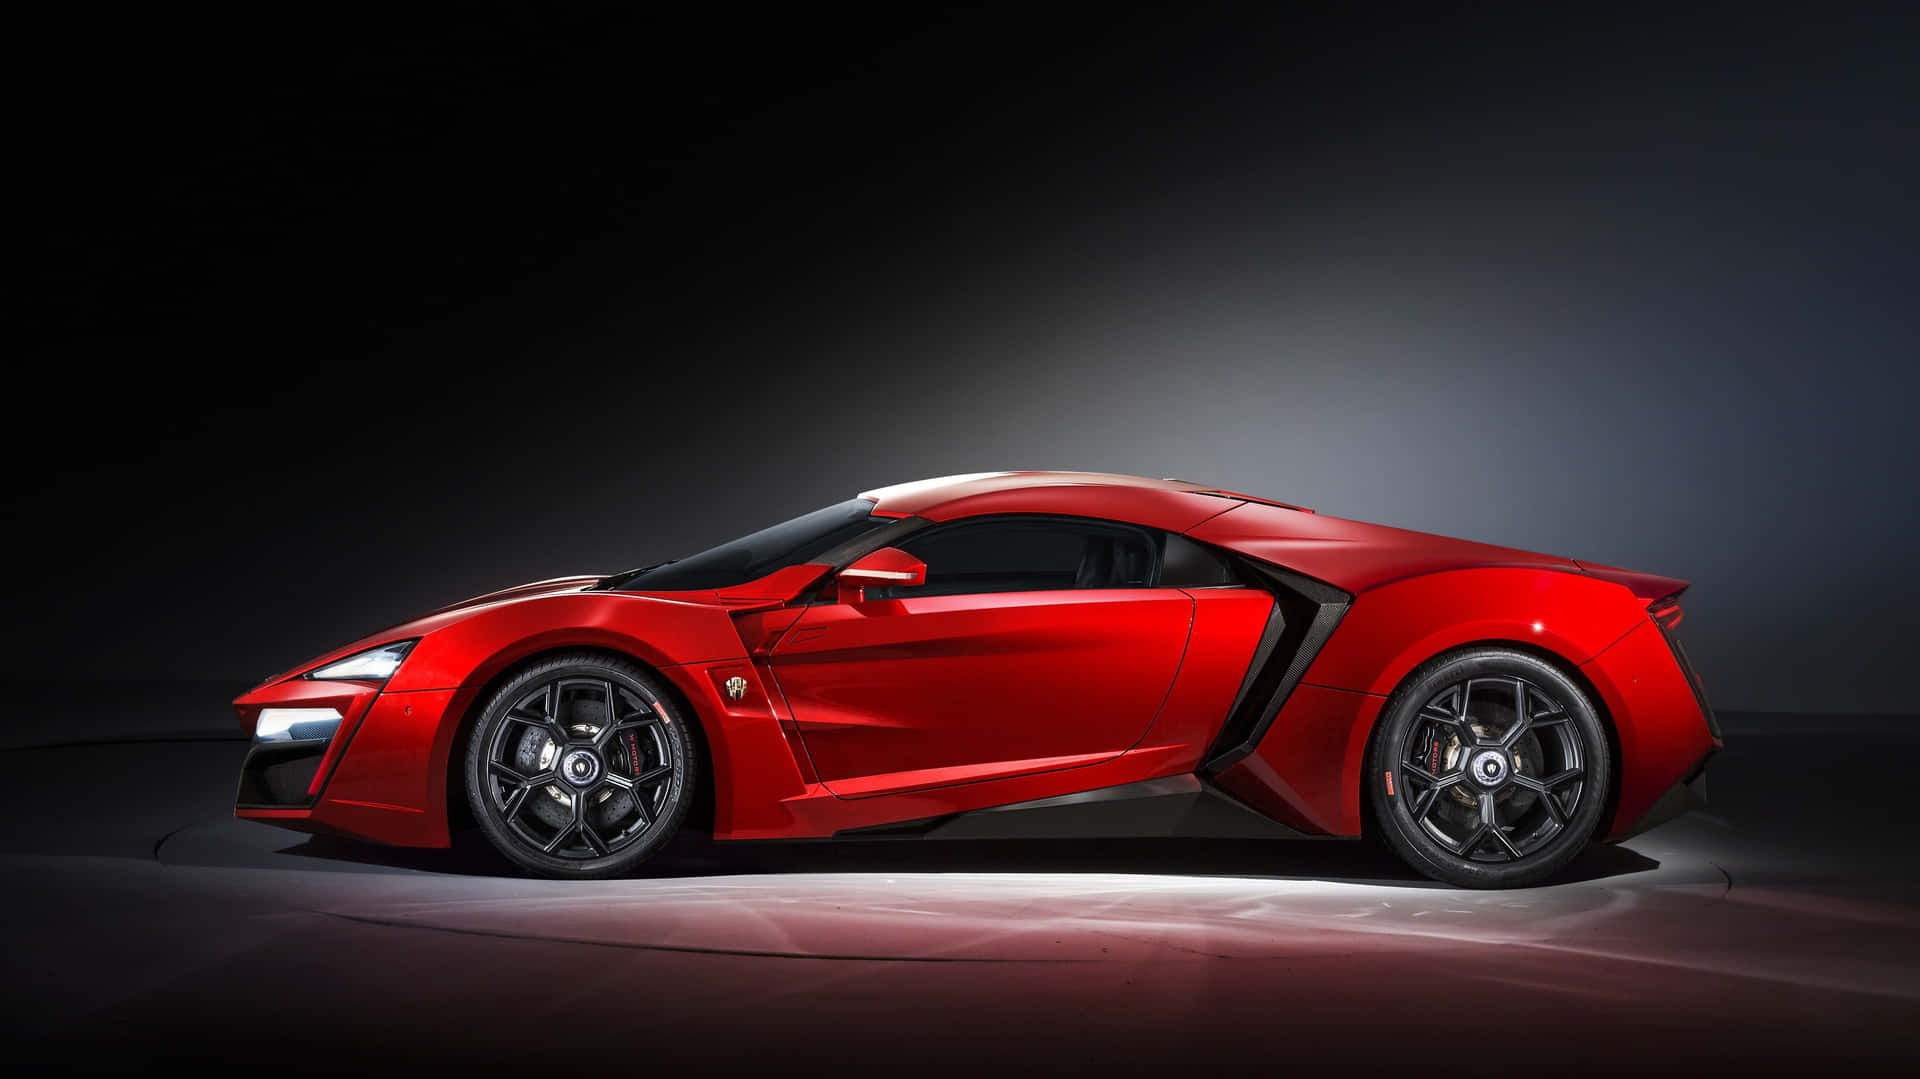 Sleek Red Hypercar Ready to Conquer the Road with Power and Performance